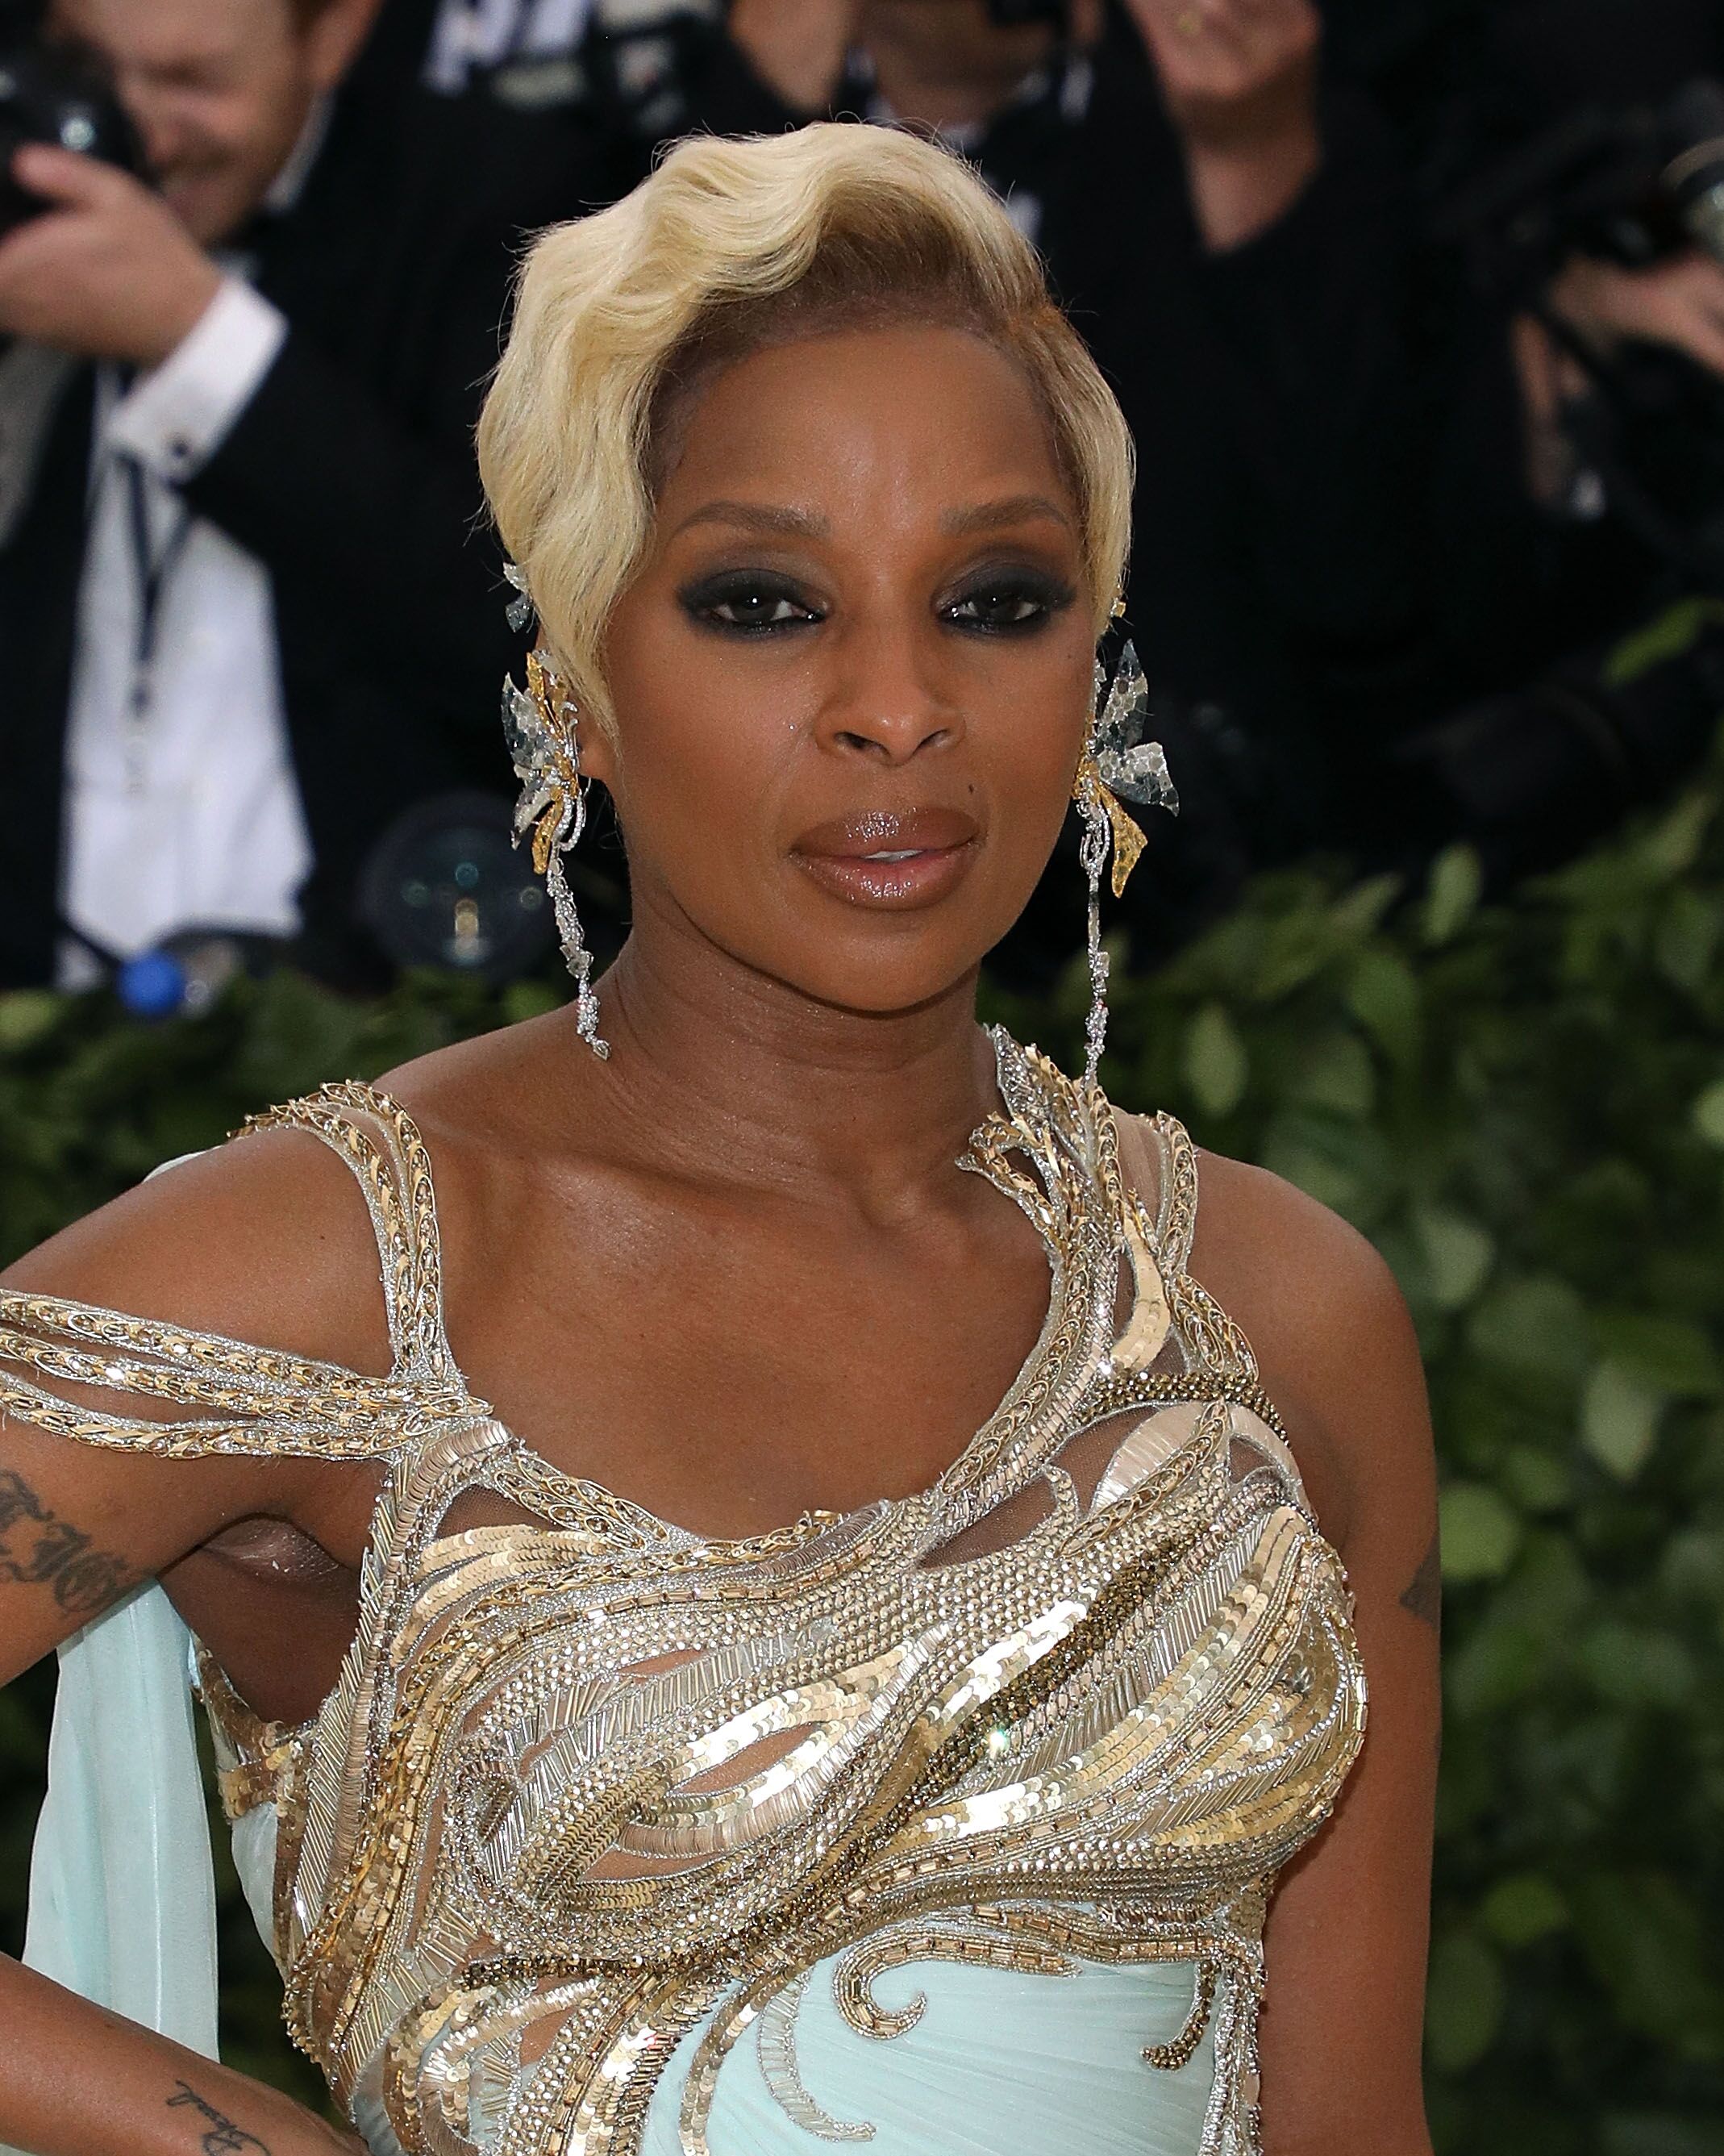 Mary J. Blige at the 2018 MET Gala/ Source: Getty Images